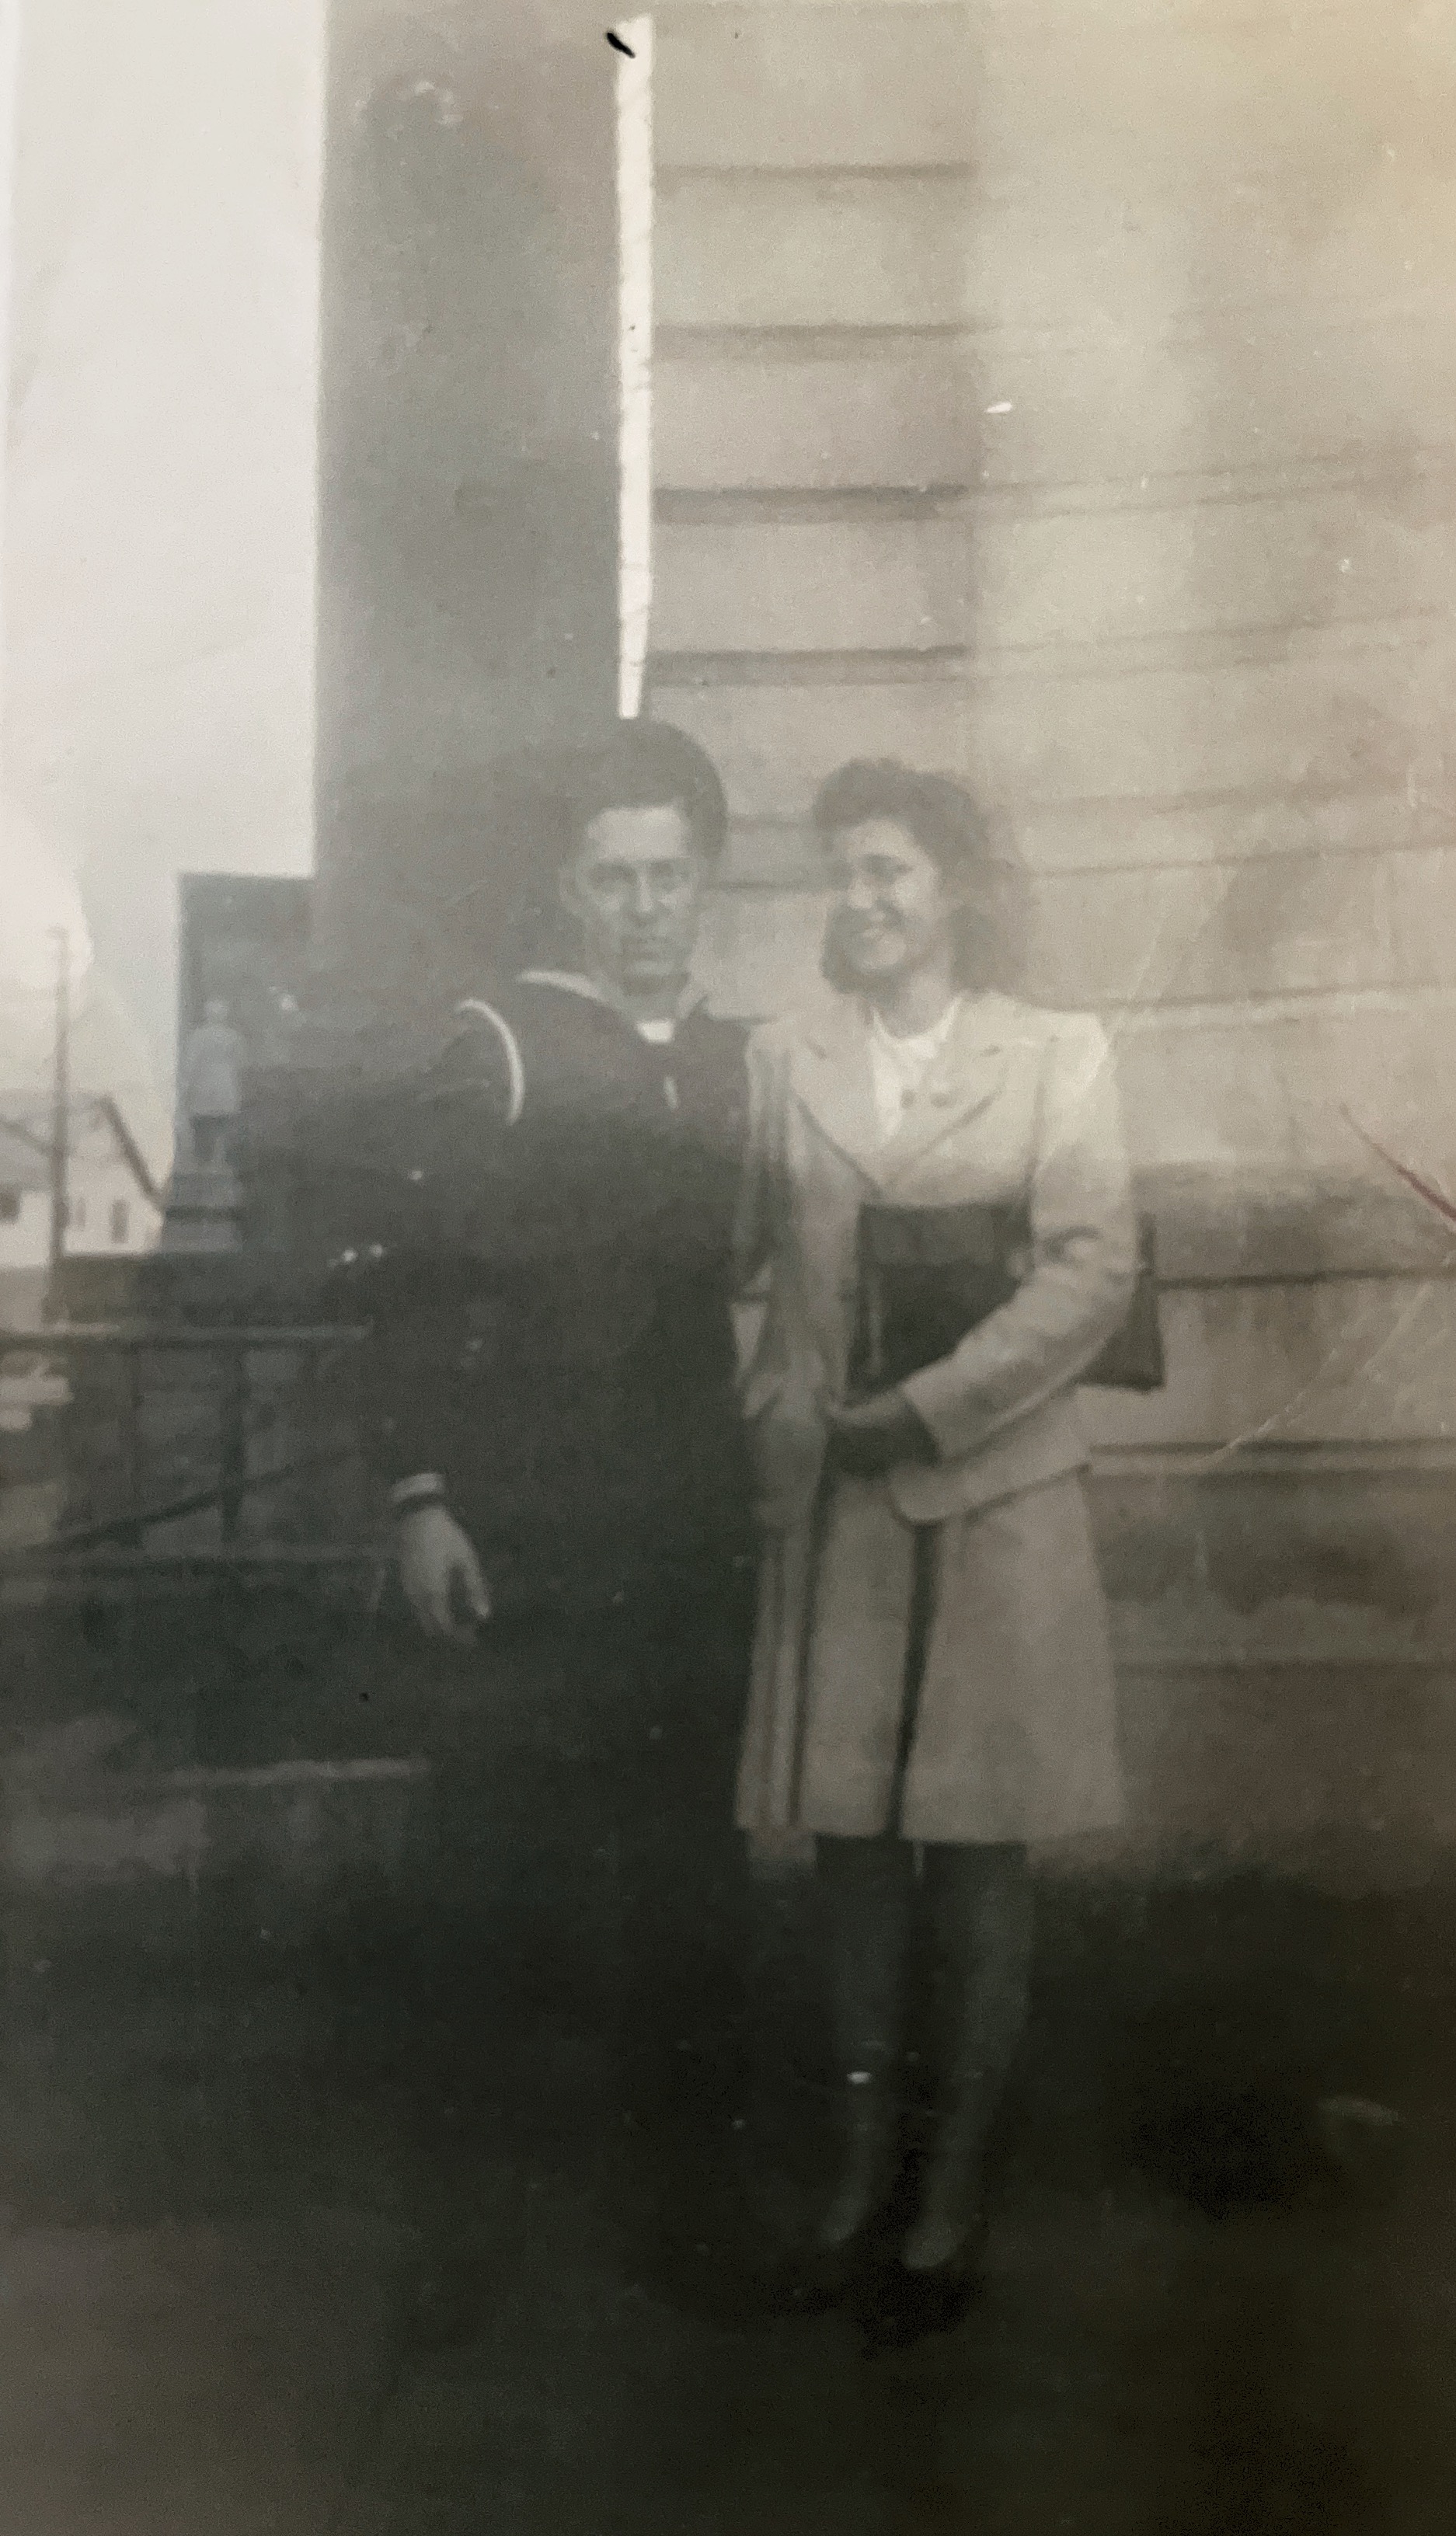 Gram and Gramp Poynter on their wedding day, March 19, 1945